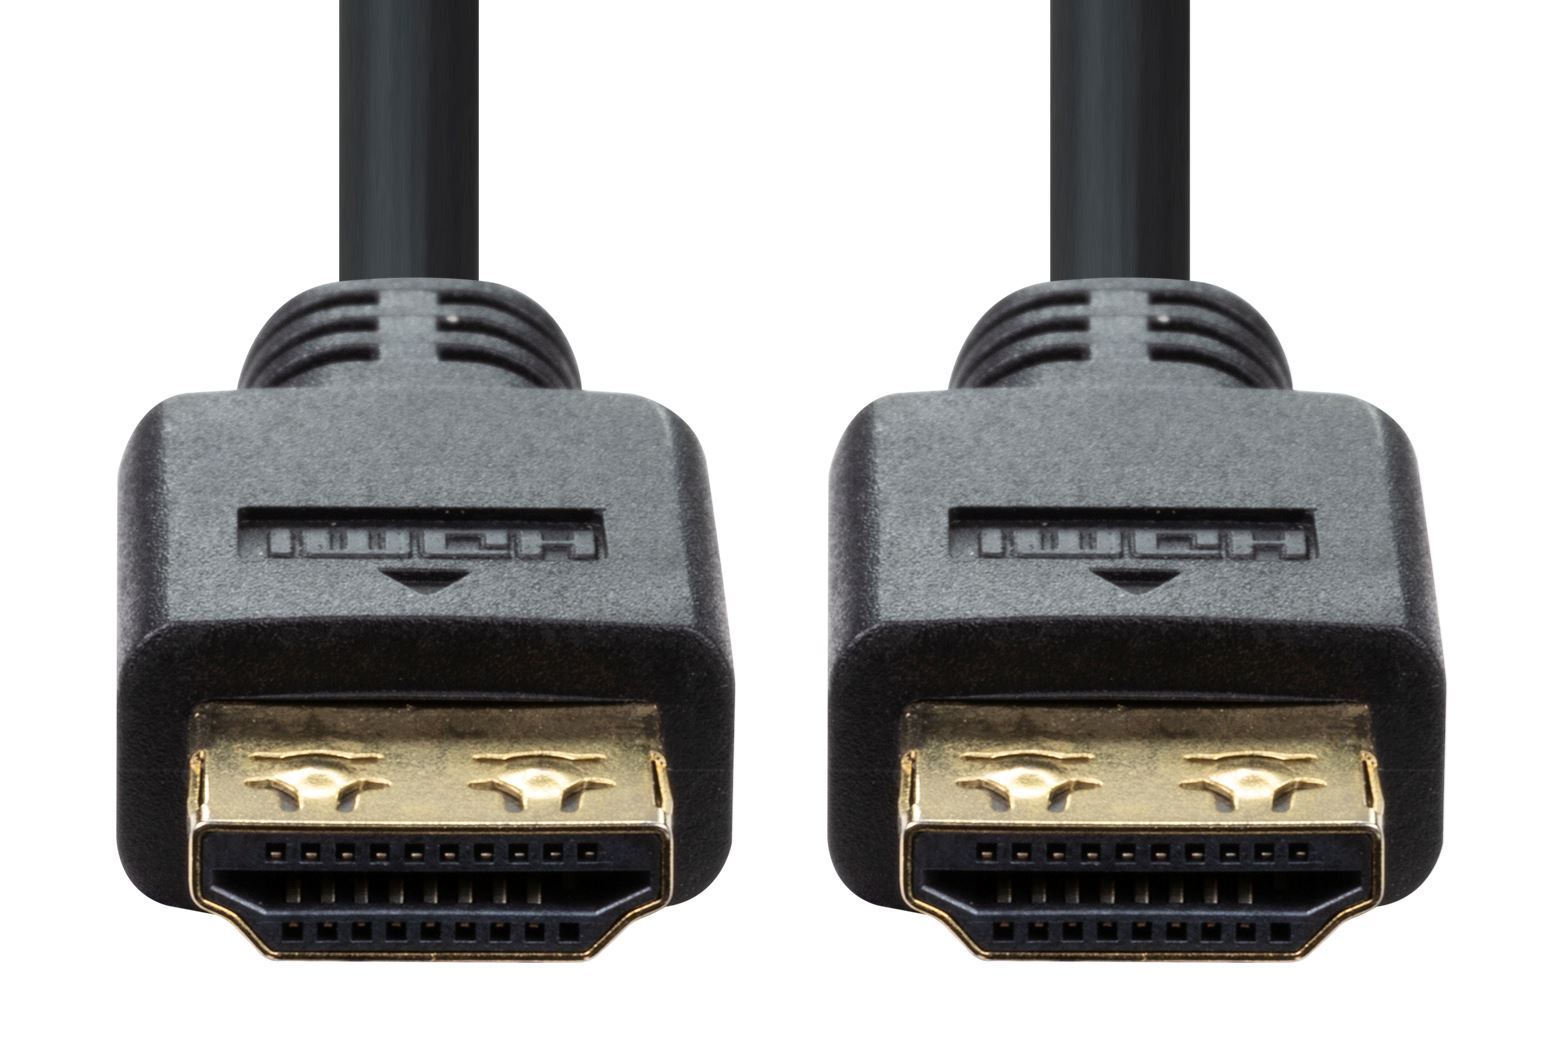 DYNAMIX_1.5m_HDMI_High_Speed_18Gbps_Flexi_Lock_Cable_with_Ethernet._Max_Res:_4K2K@30/60Hz._32_Audio_channels._10/12bit_colour_depth._Supports_CEC_2.0,_3D,_ARC,_Ethernet_2x_simultaneous_video_streams. 710